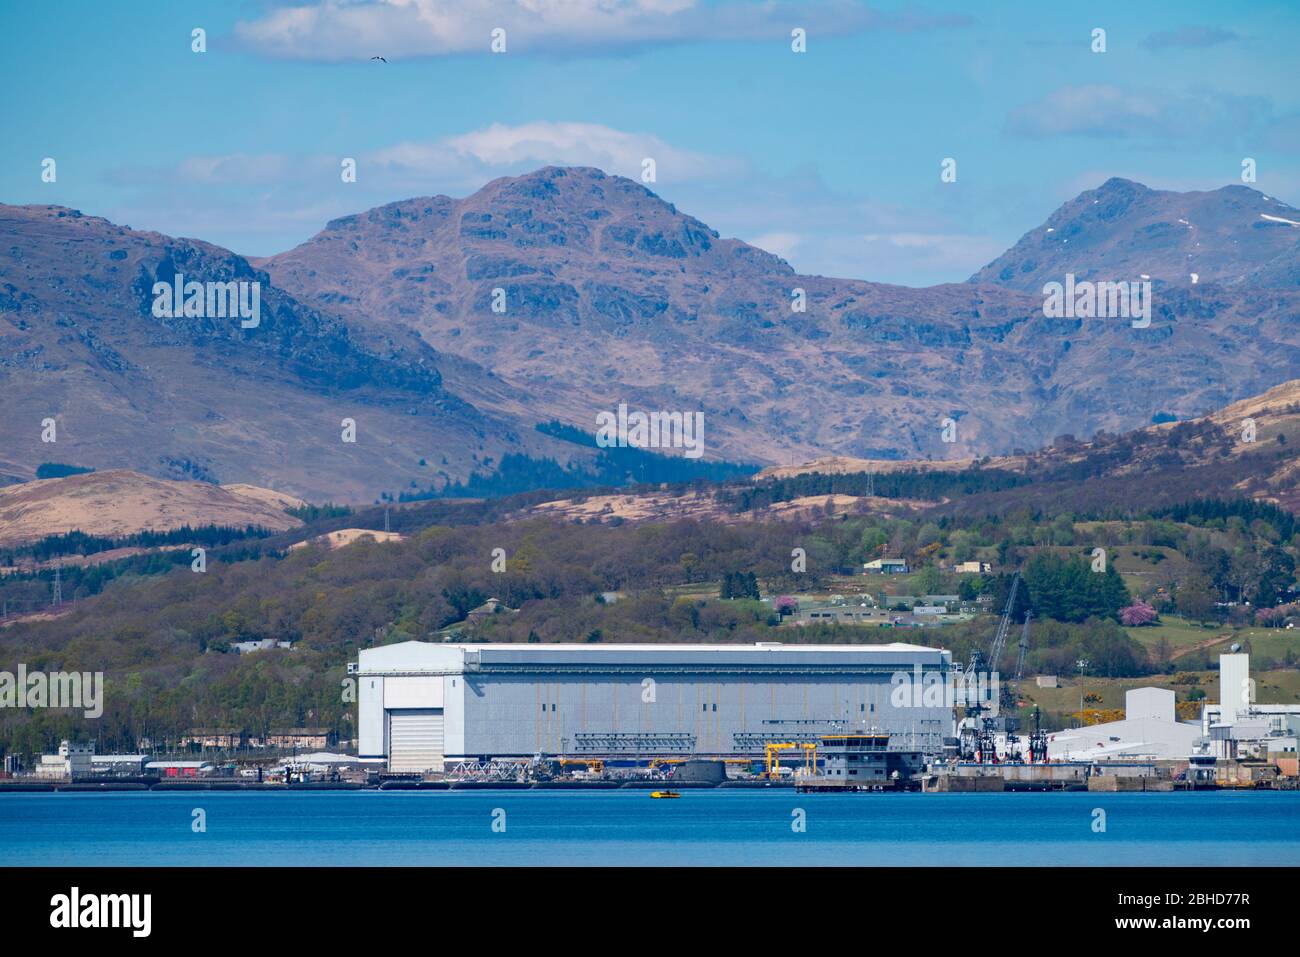 View HMNB Clyde the British naval submarine base at Faslane on the Gare Loch in Argyll & Bute, Scotland, UK Stock Photo